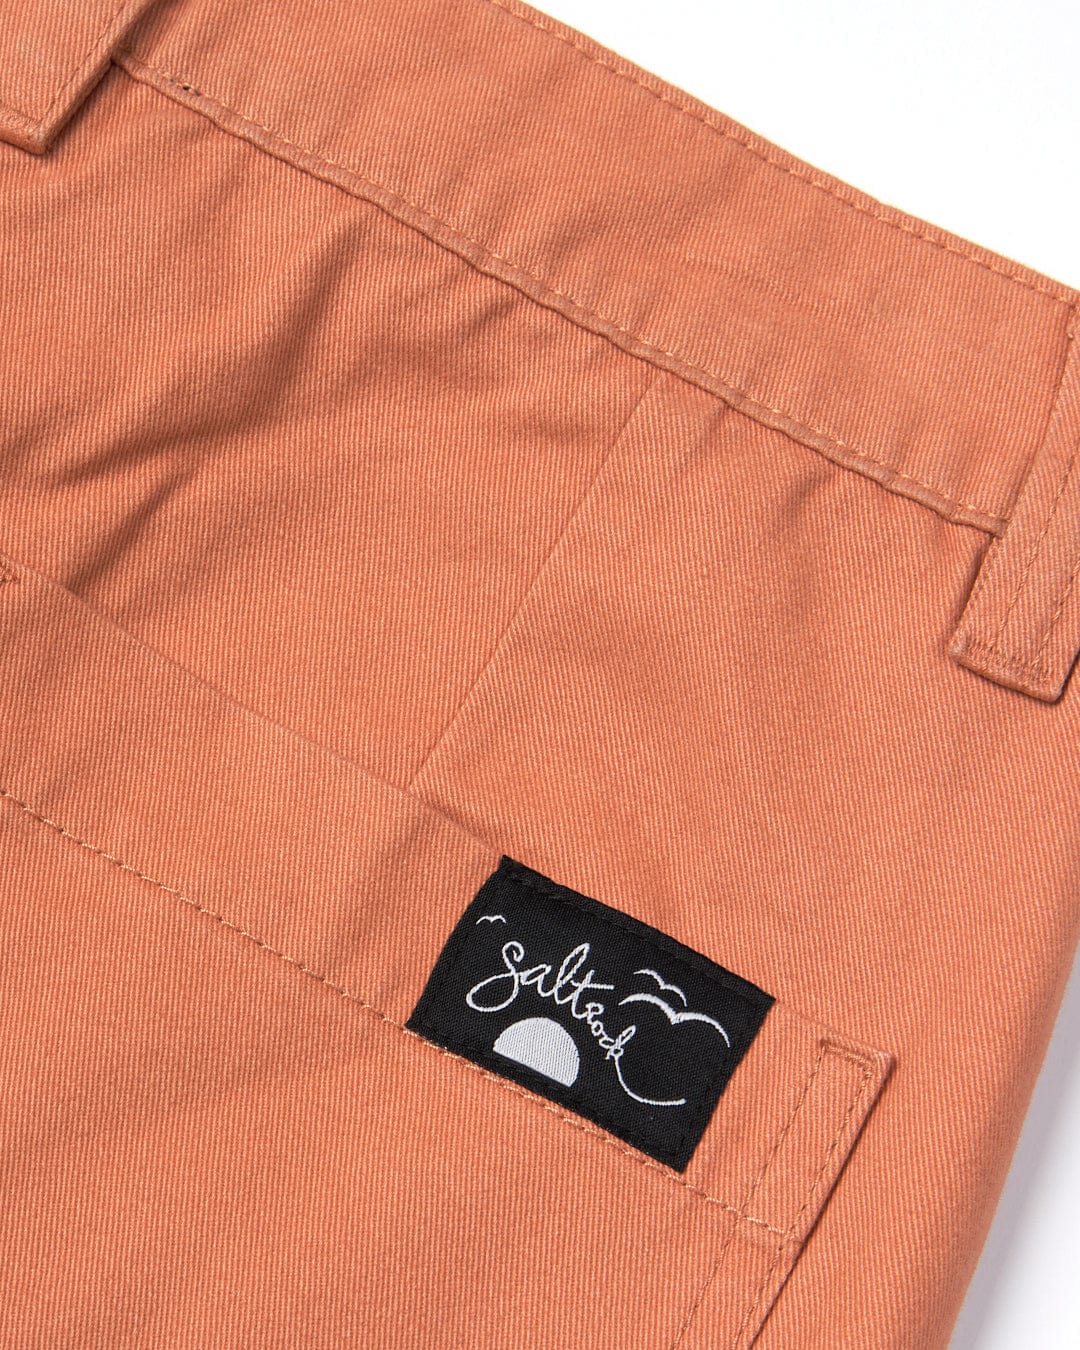 Close-up of a terracotta-colored, cotton twill Liesl chino shorts with a black Saltrock designer label.